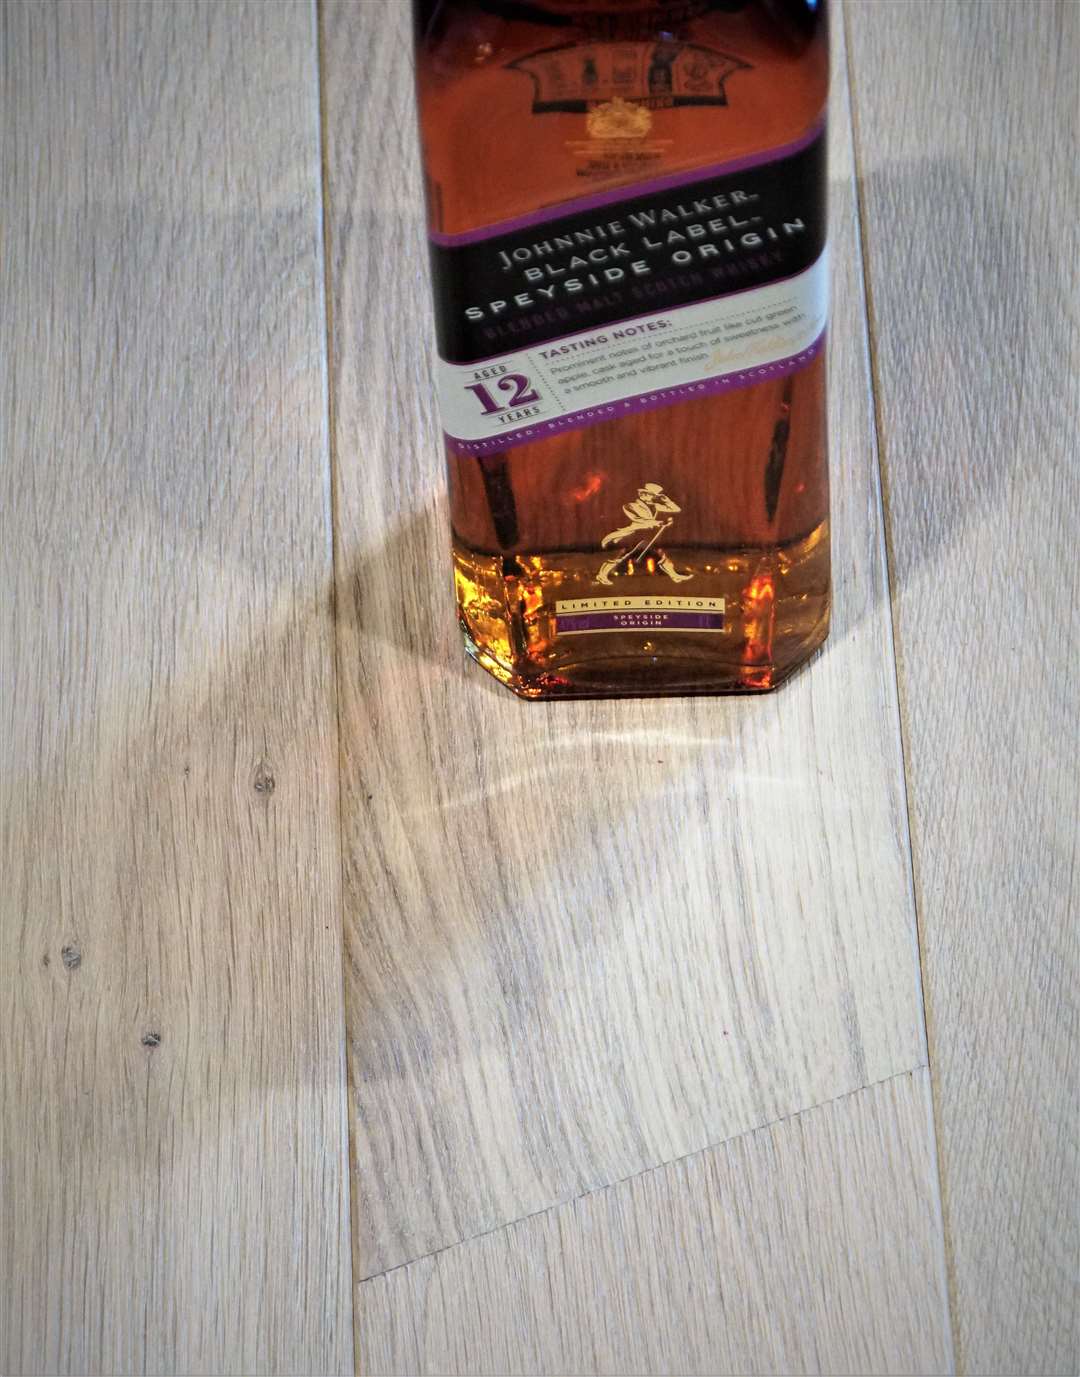 The angle of the whisky label perfectly matches the angled cut of the flooring panels.